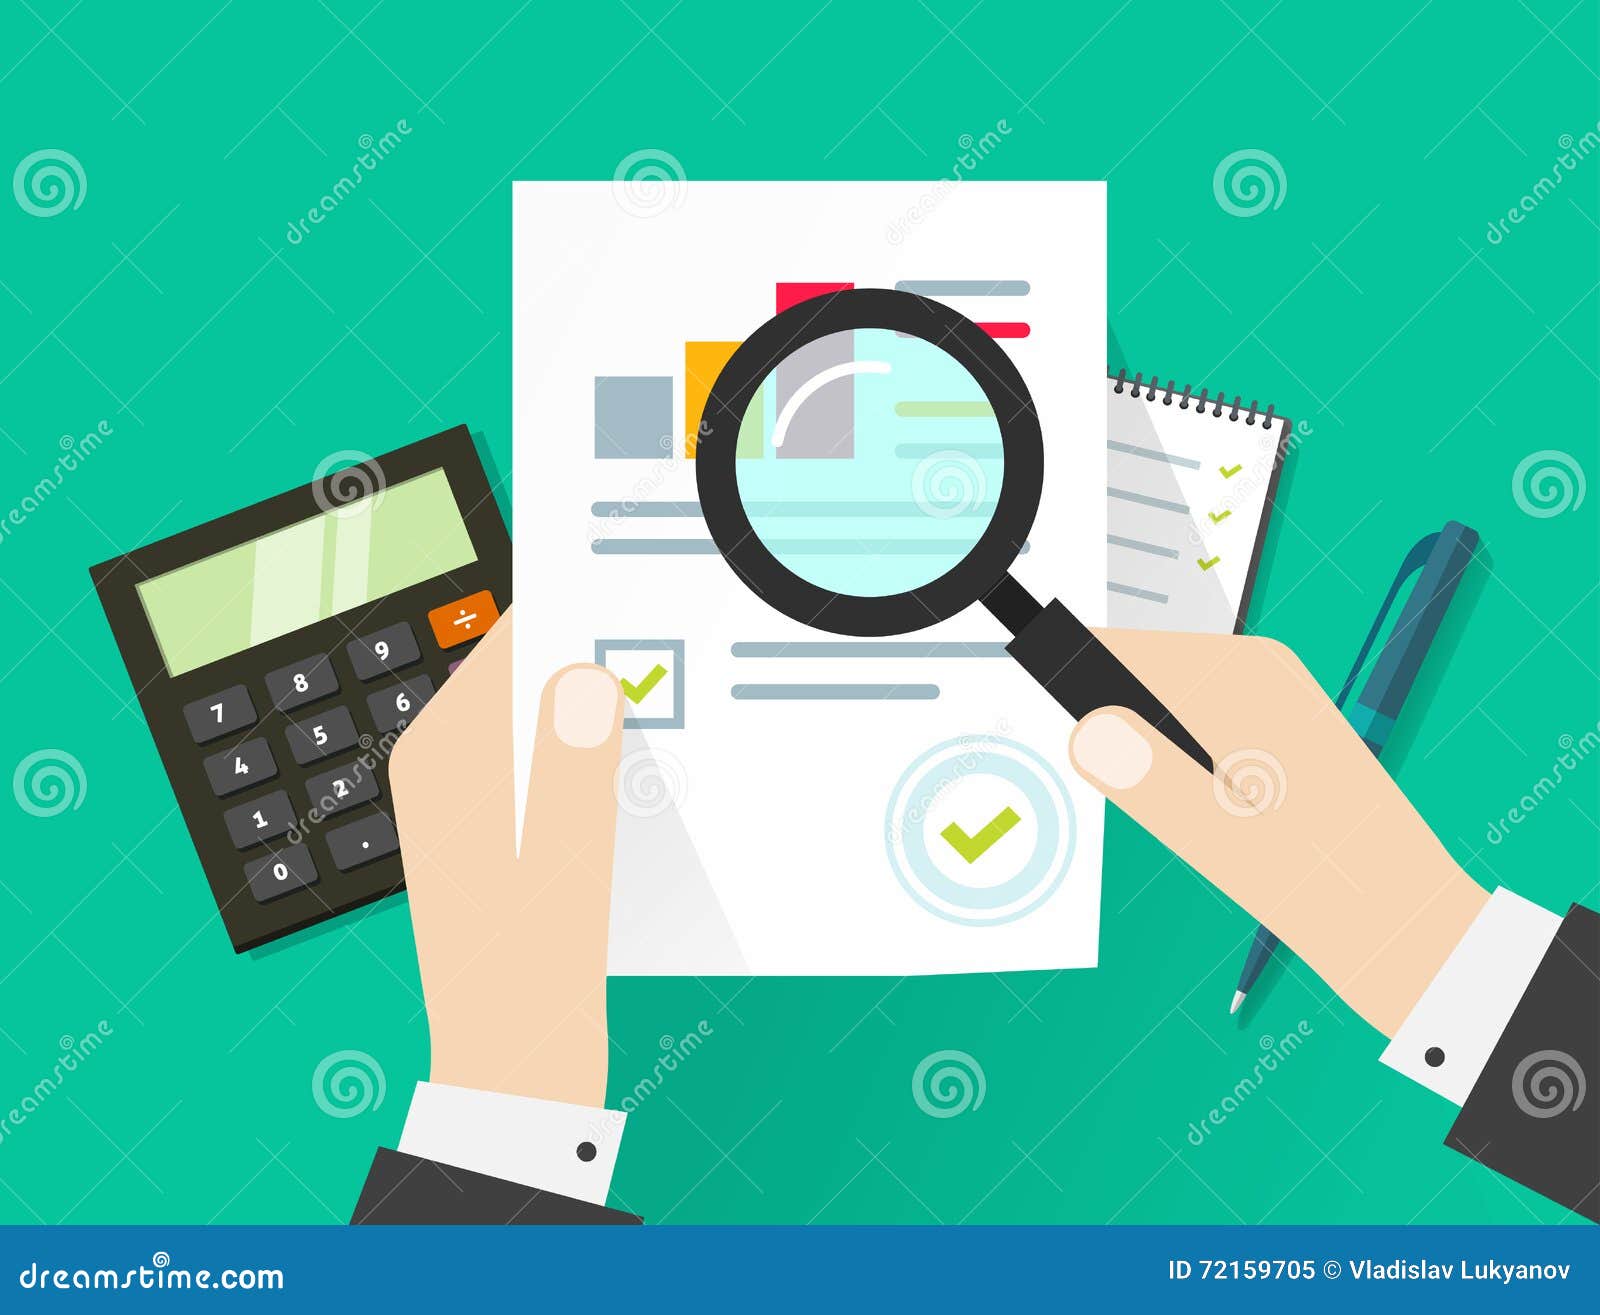 financial audit, auditing tax process, paper sheet with hands